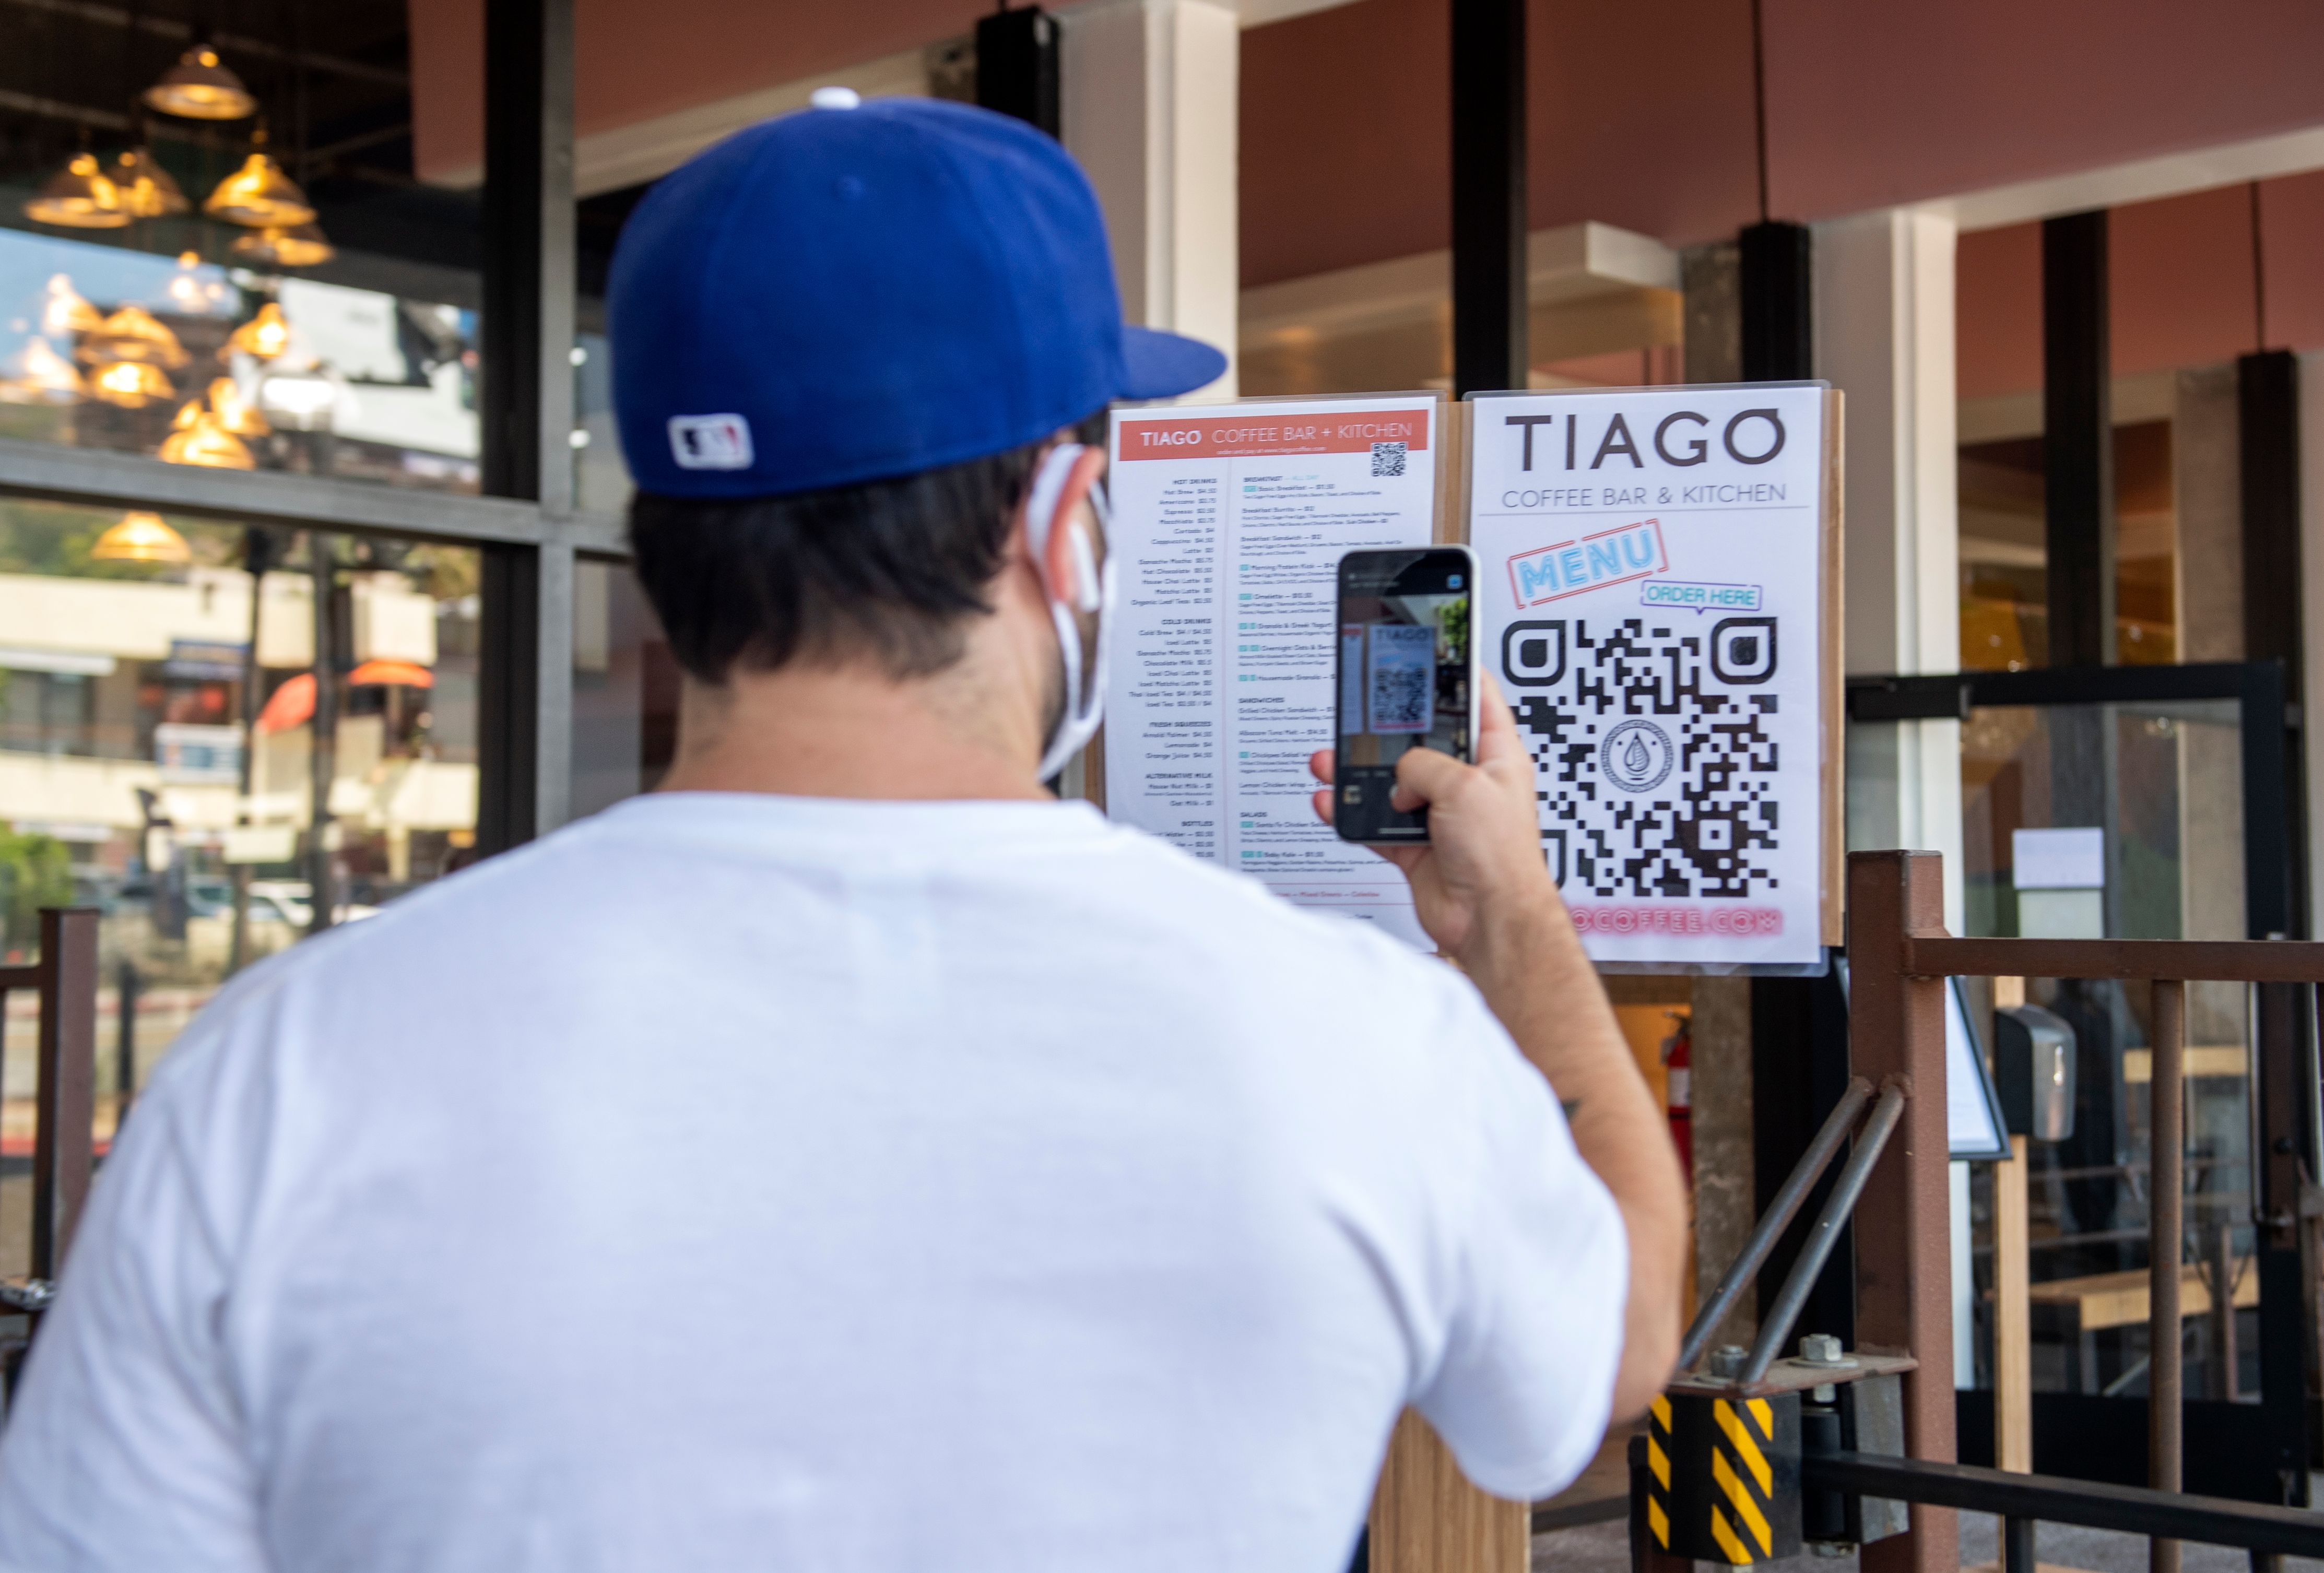 Customer scans a menu to place an order at Tiago Cafe in Hollywood.